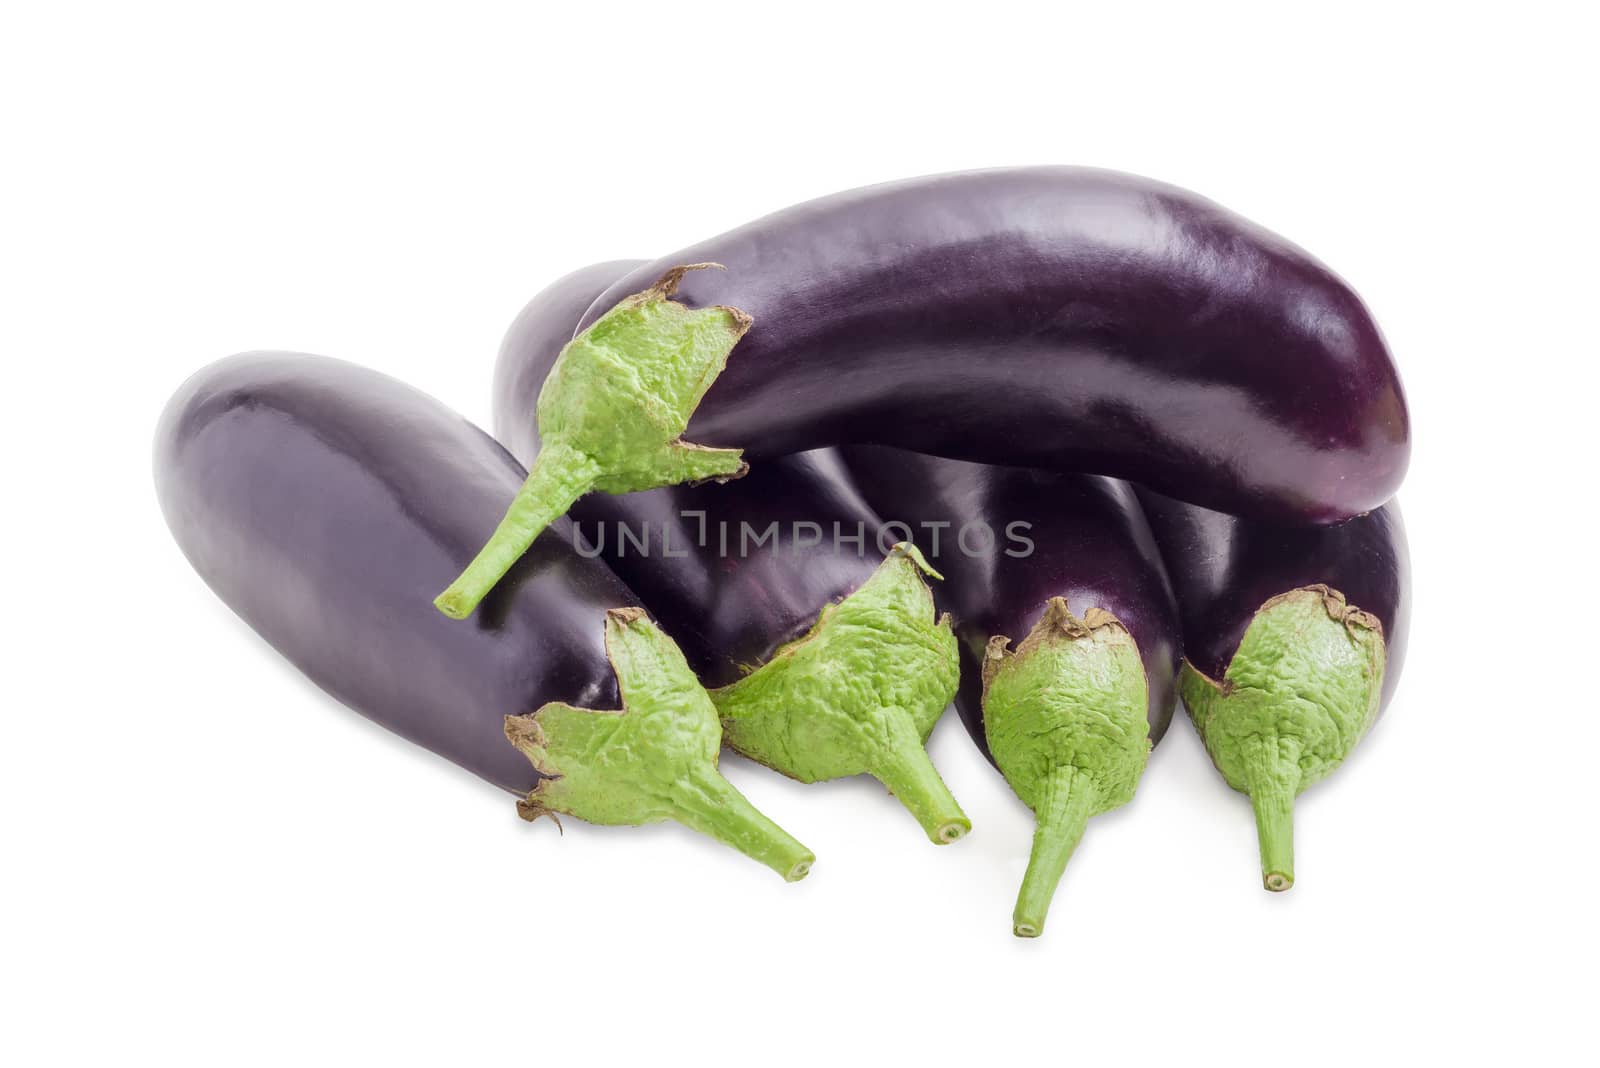 Pile of the fresh purple eggplants on a white background
